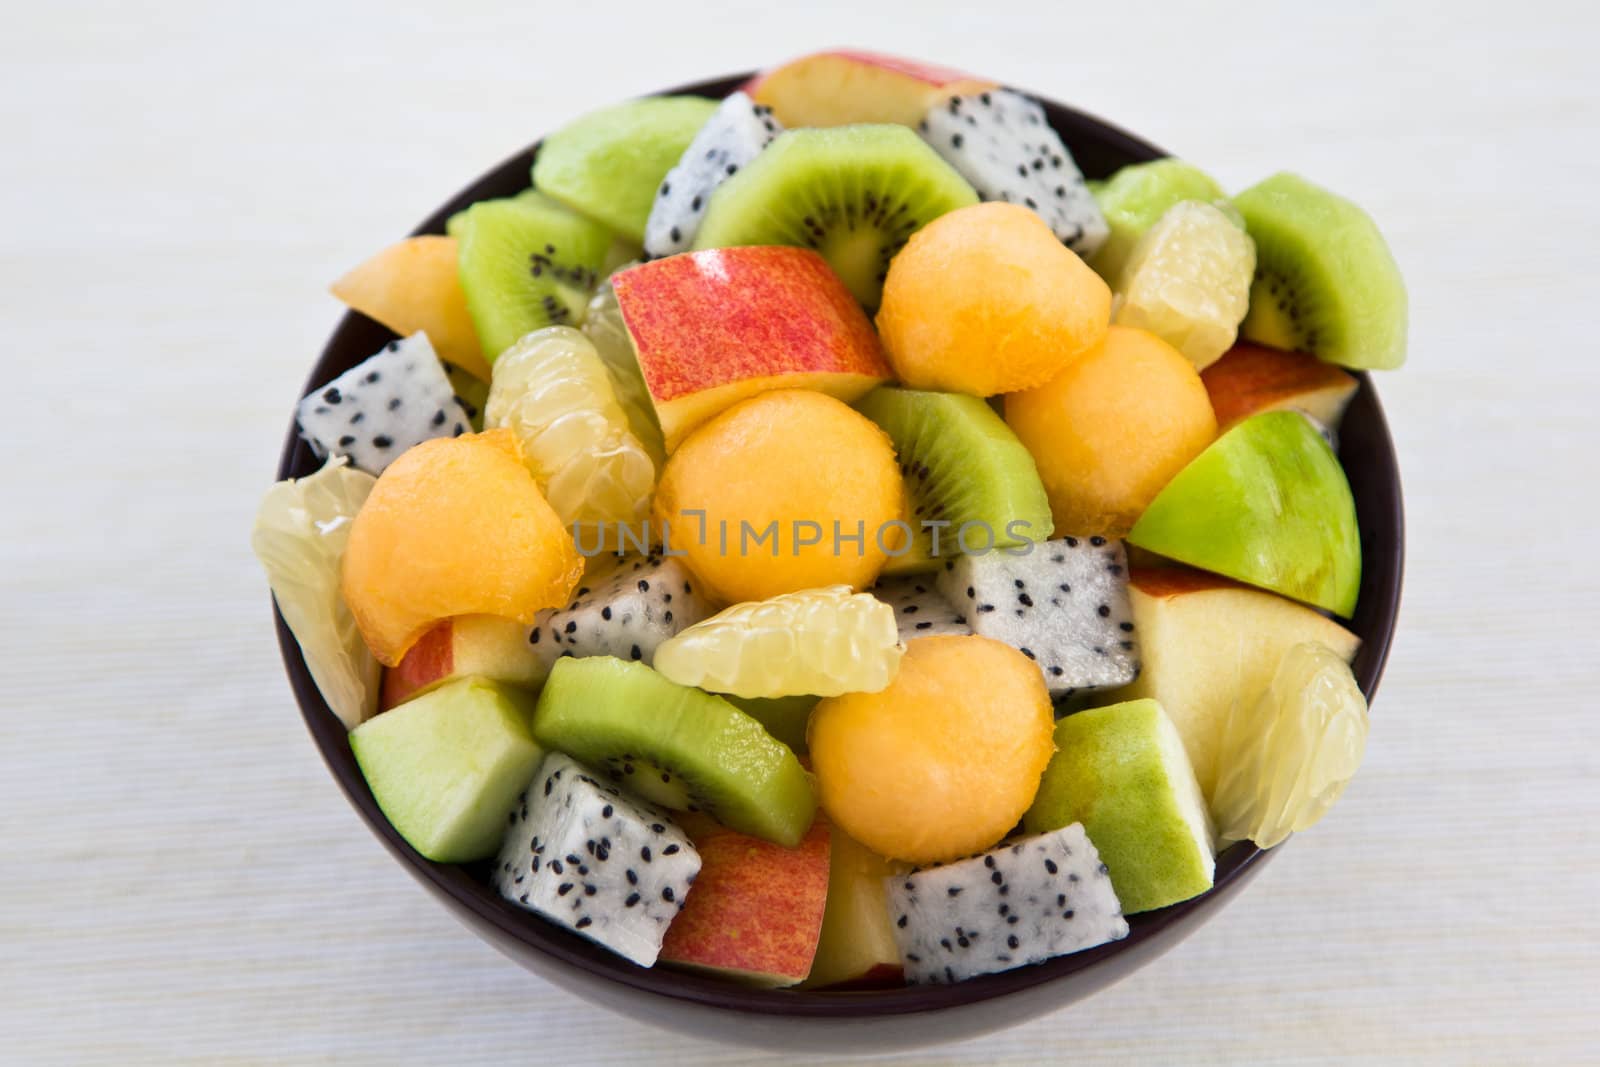 Fruits salad by vanillaechoes